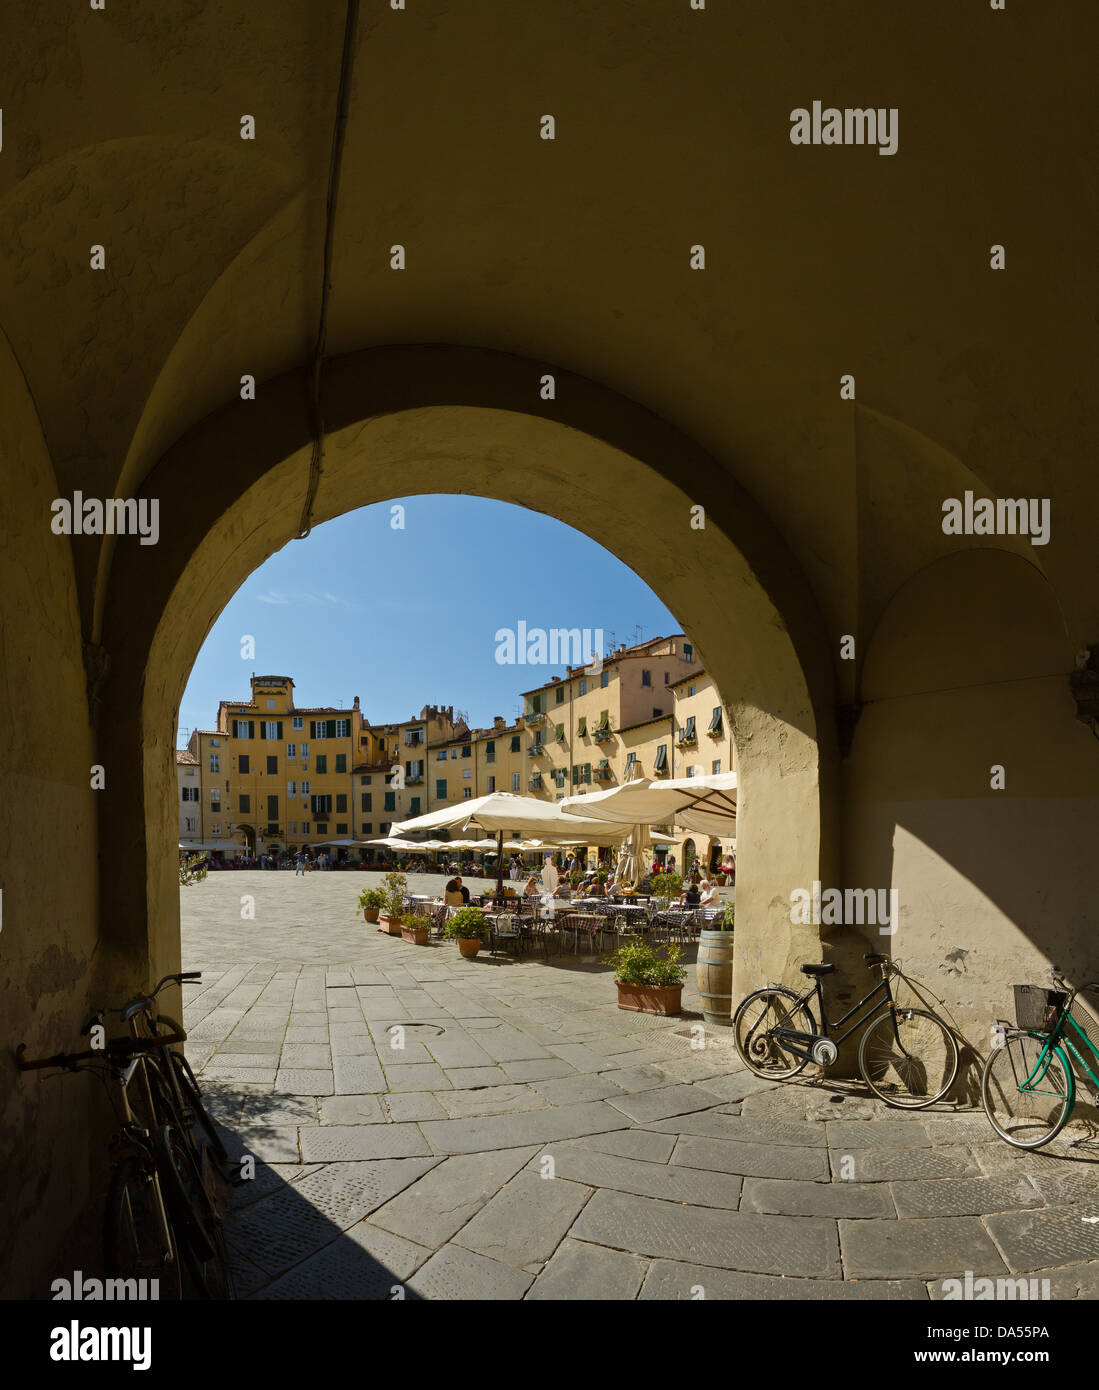 Lucca, Italy, Europe, Tuscany, Toscana, place, street cafe, gate Stock Photo